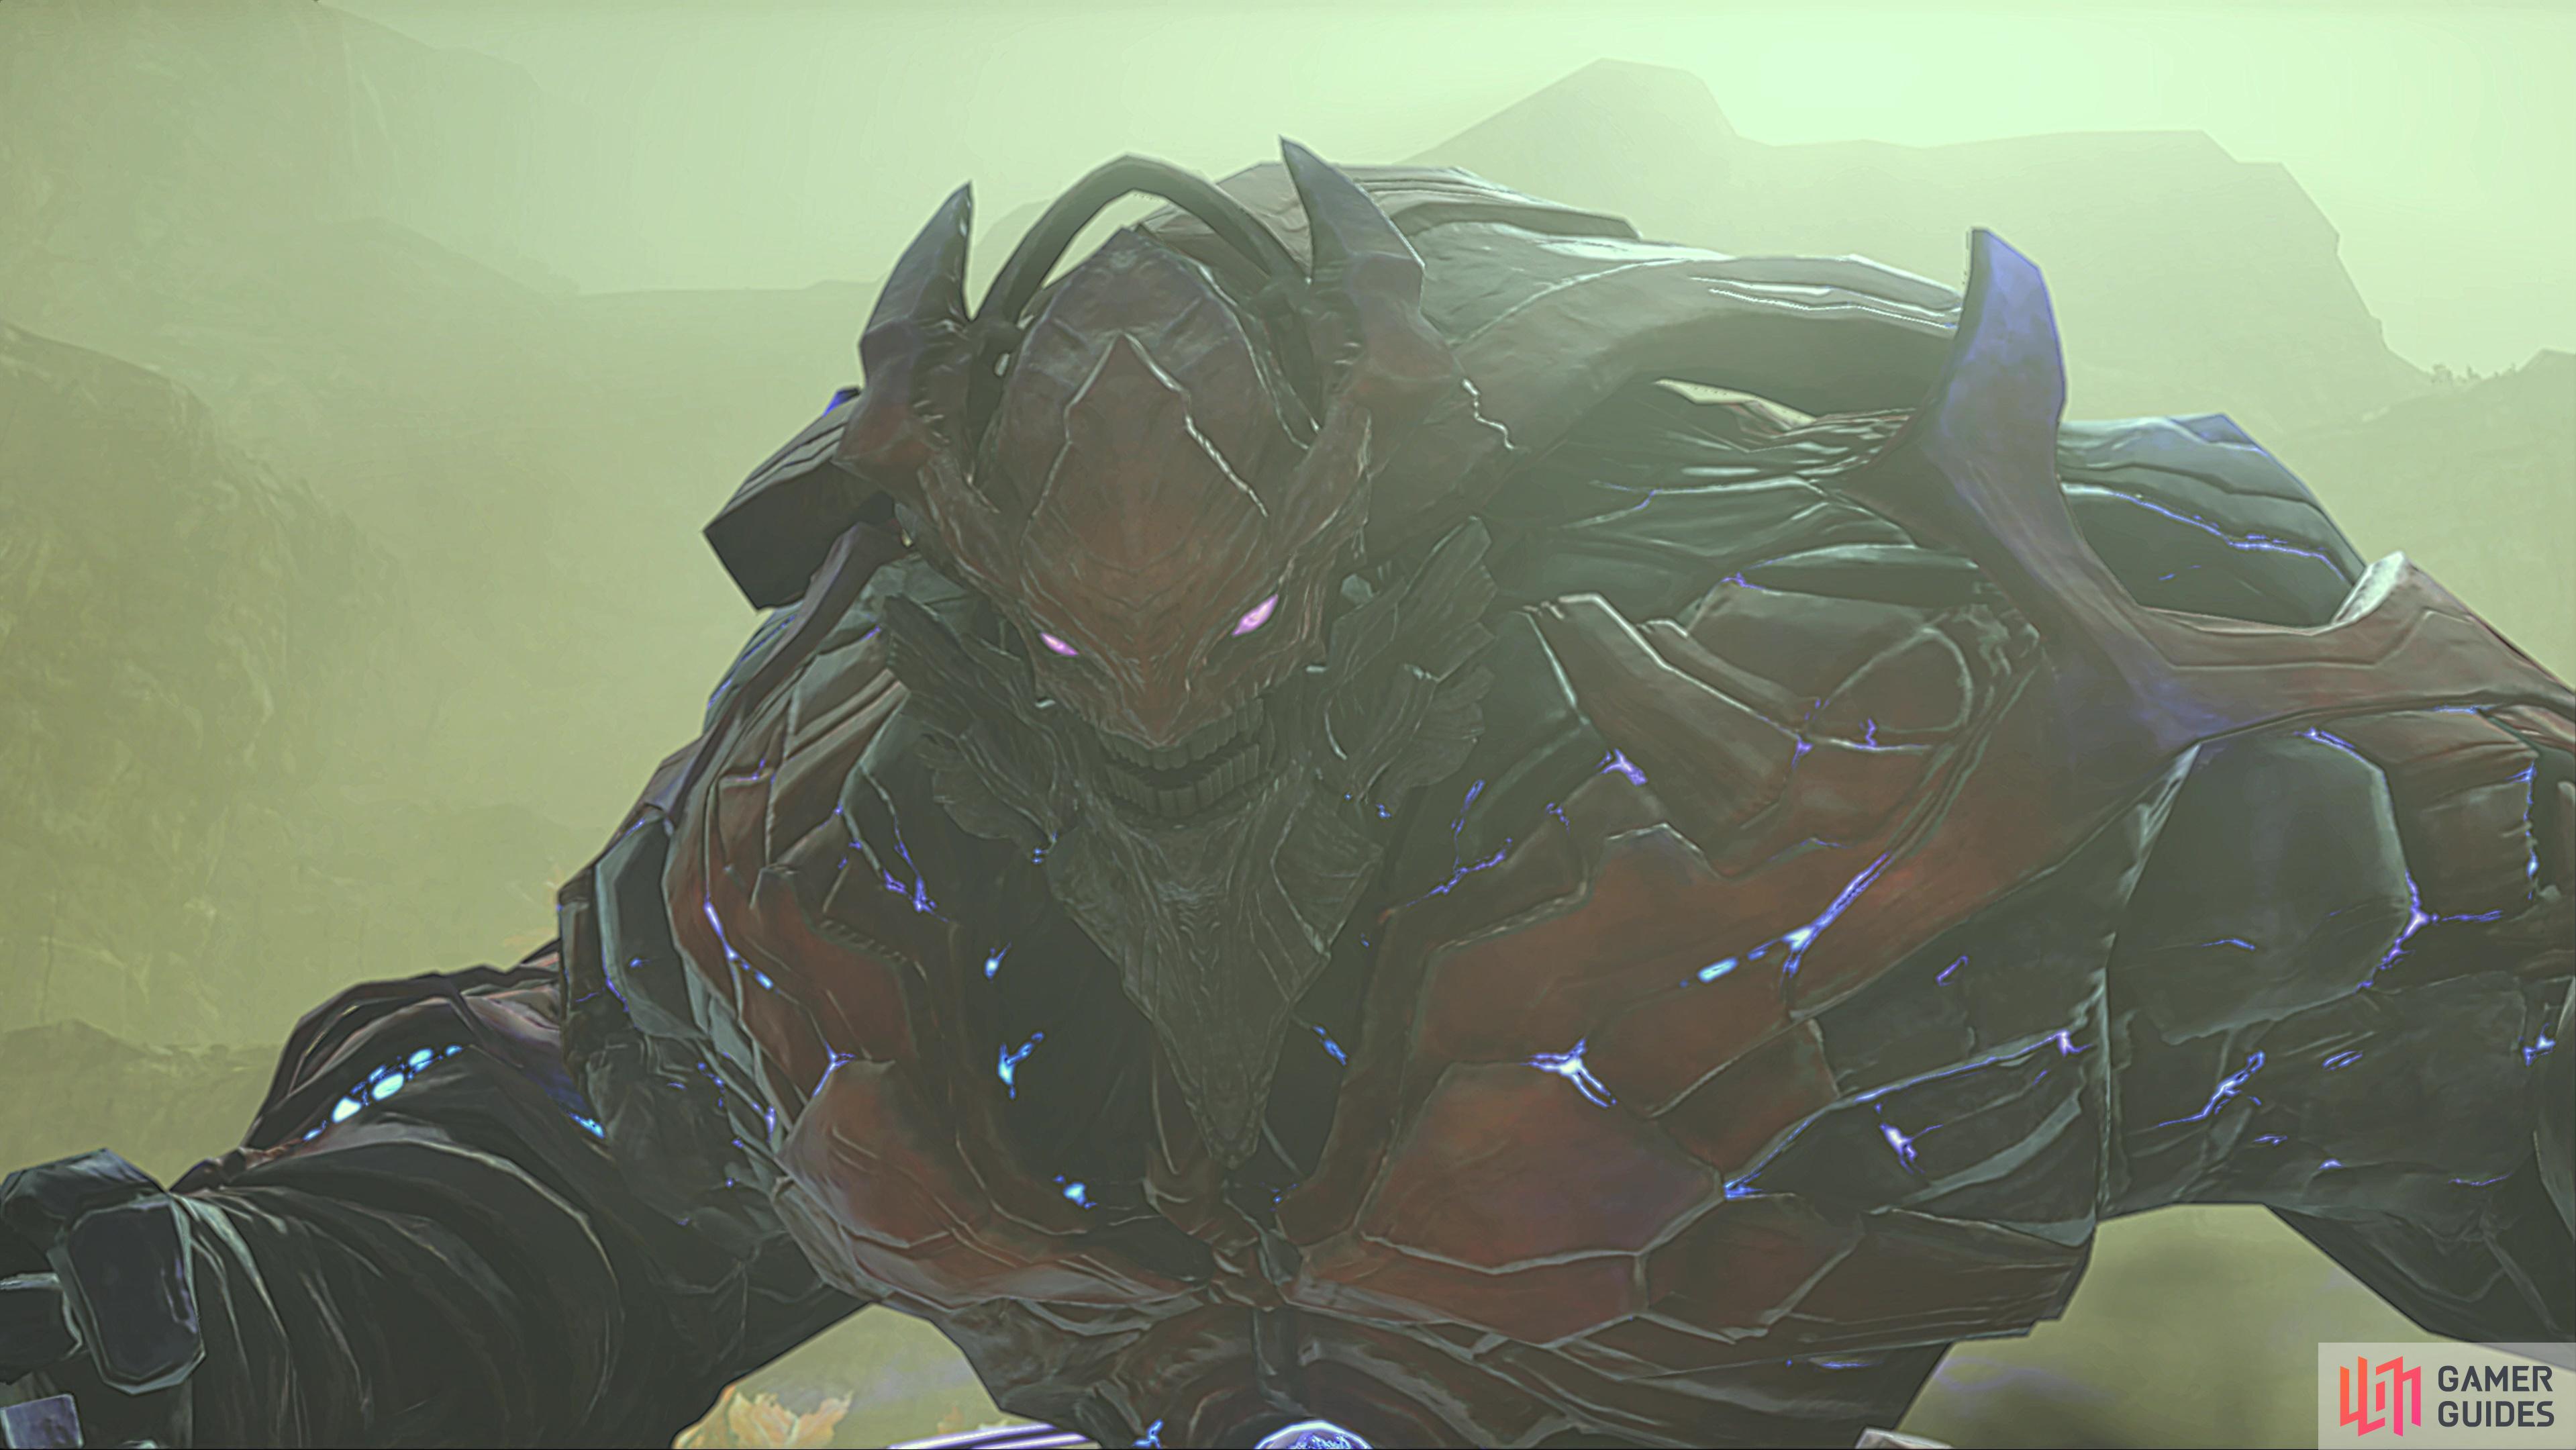 Consul K and Moebius K are a boss fight in Chapter 2 of Xenoblade Chronicles 3.